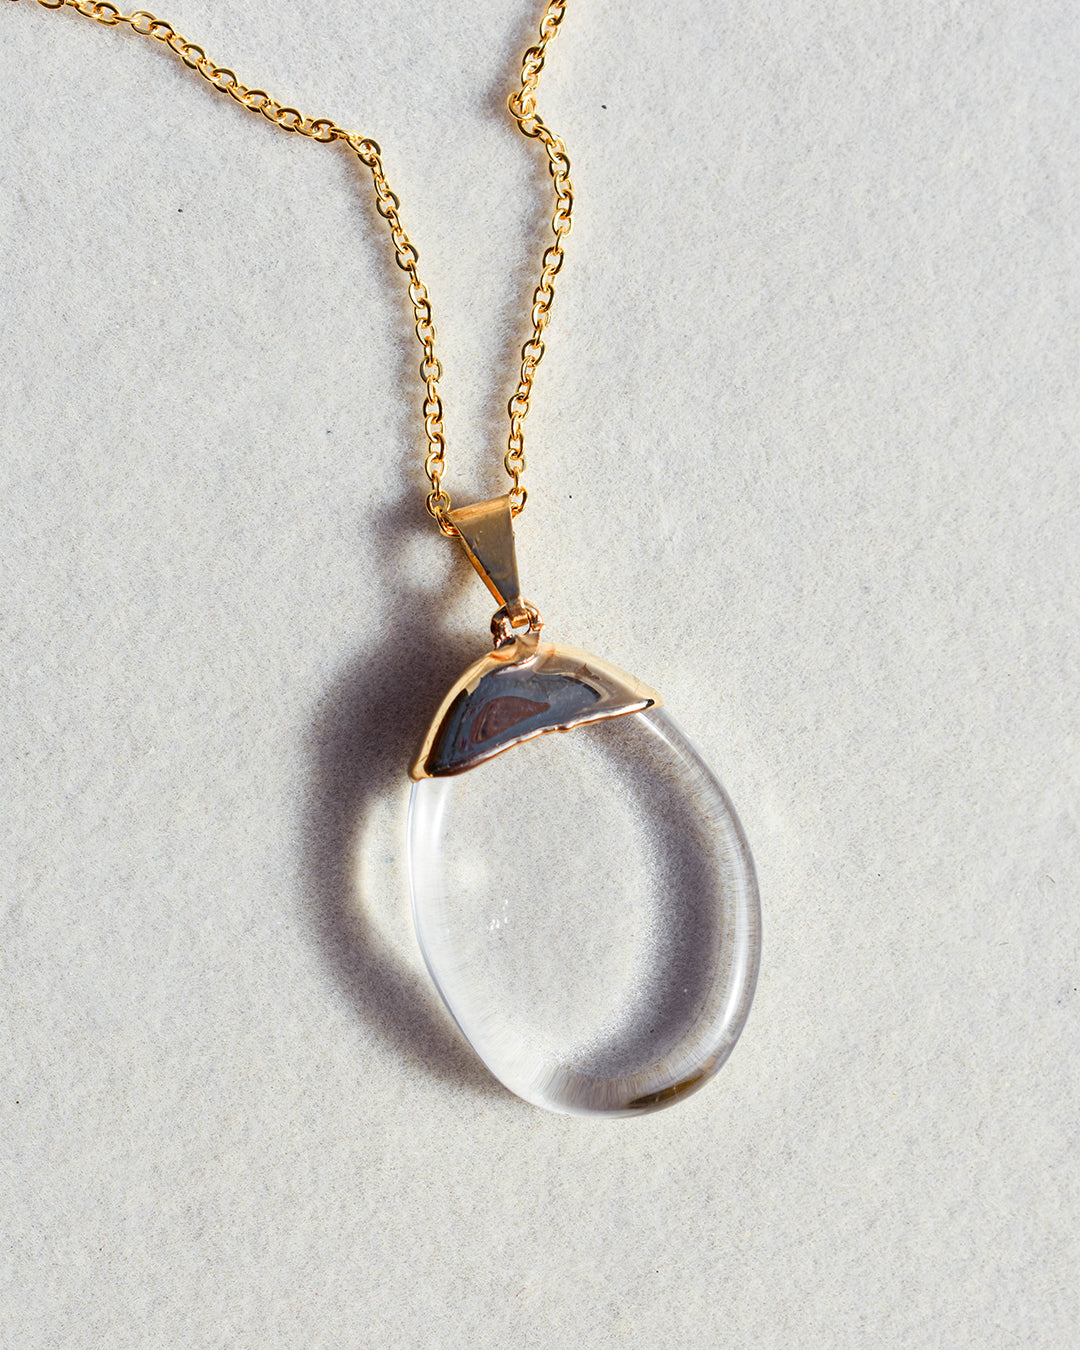 Gold plated chain with Clear Quartz pendant